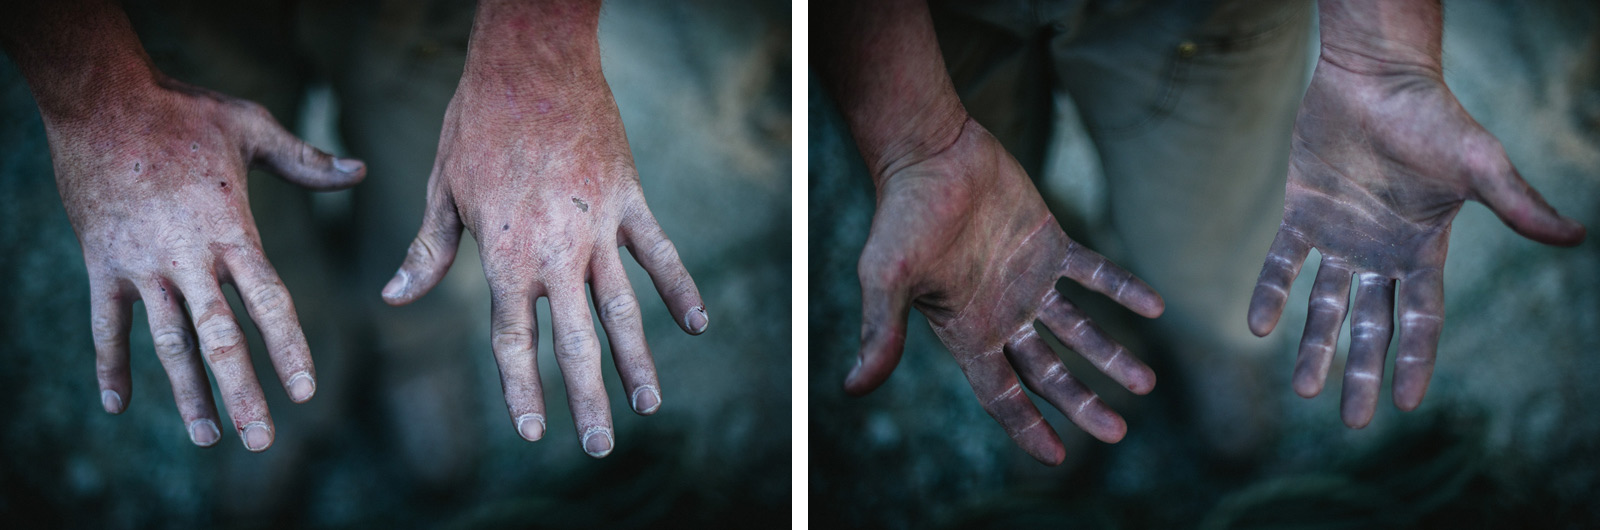 The hands tell the story of a day spent climbing up the Regular NW face of Half Dome in Yosemite.